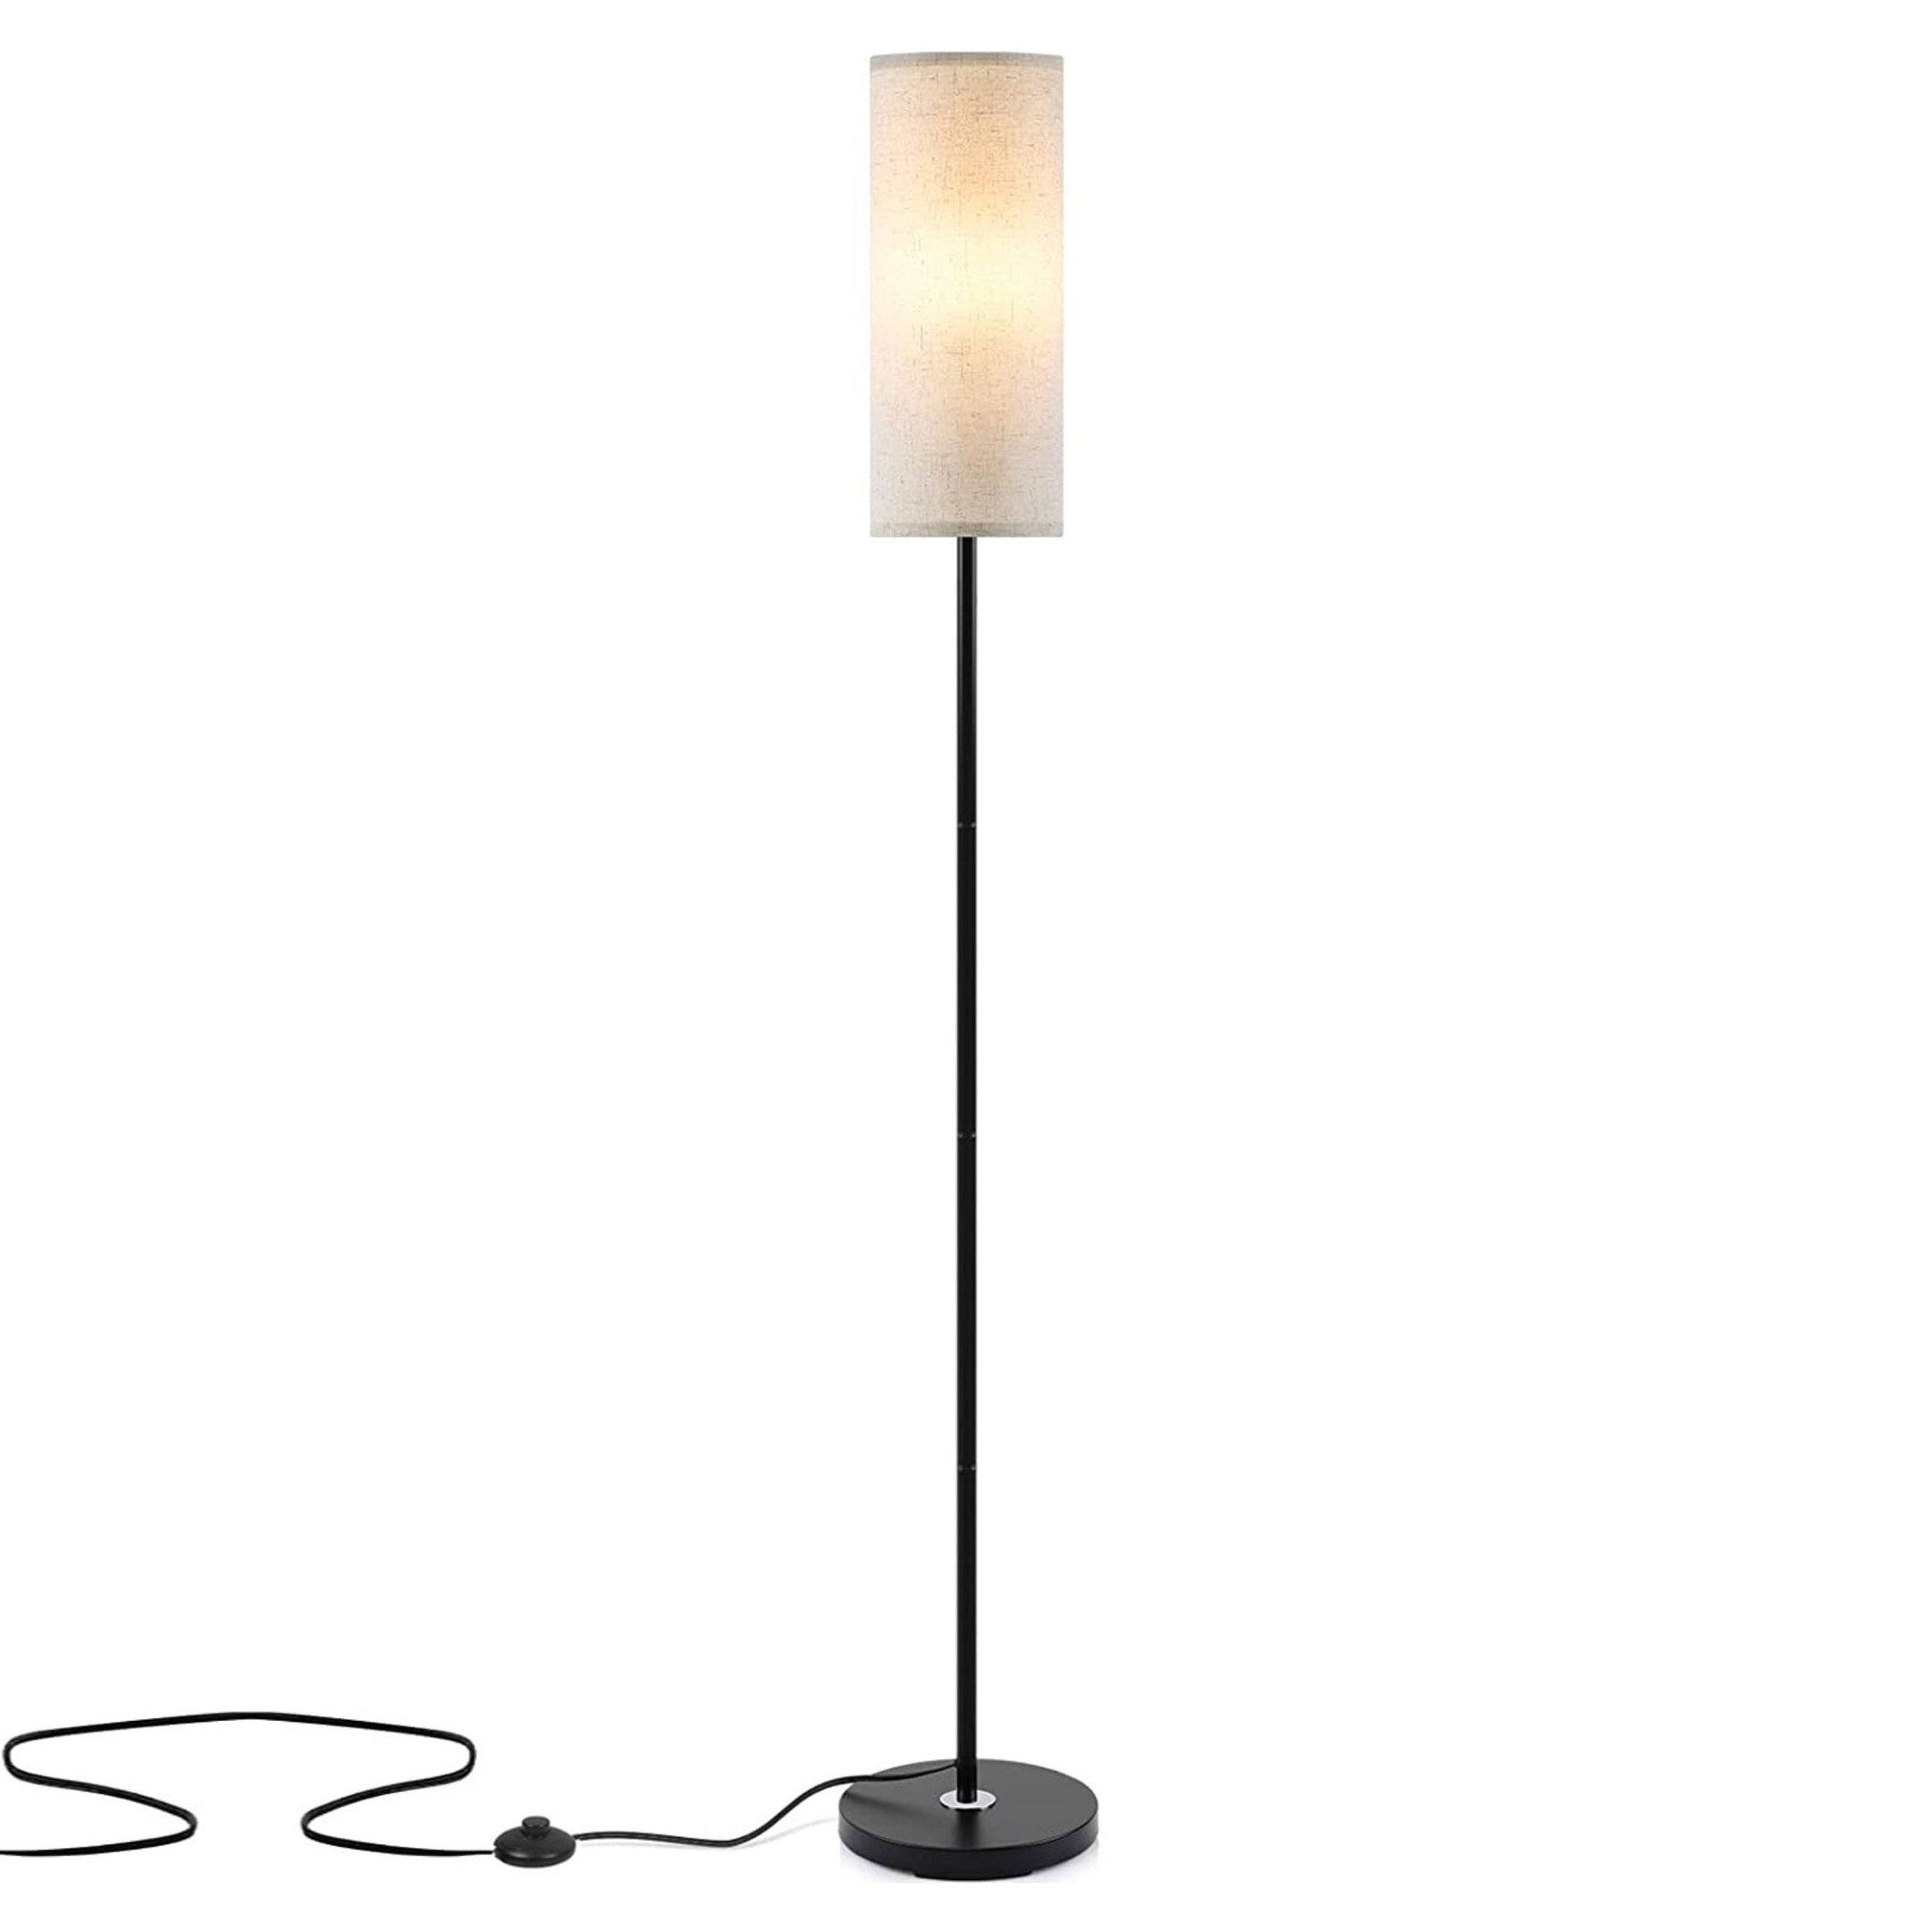 74.8in Tall Floor Lamp, 3200K Warm Yellow Light, Modern, Foot Switch, 6W Bulb - Bedroom & Living Room Decorative Standing Lamp